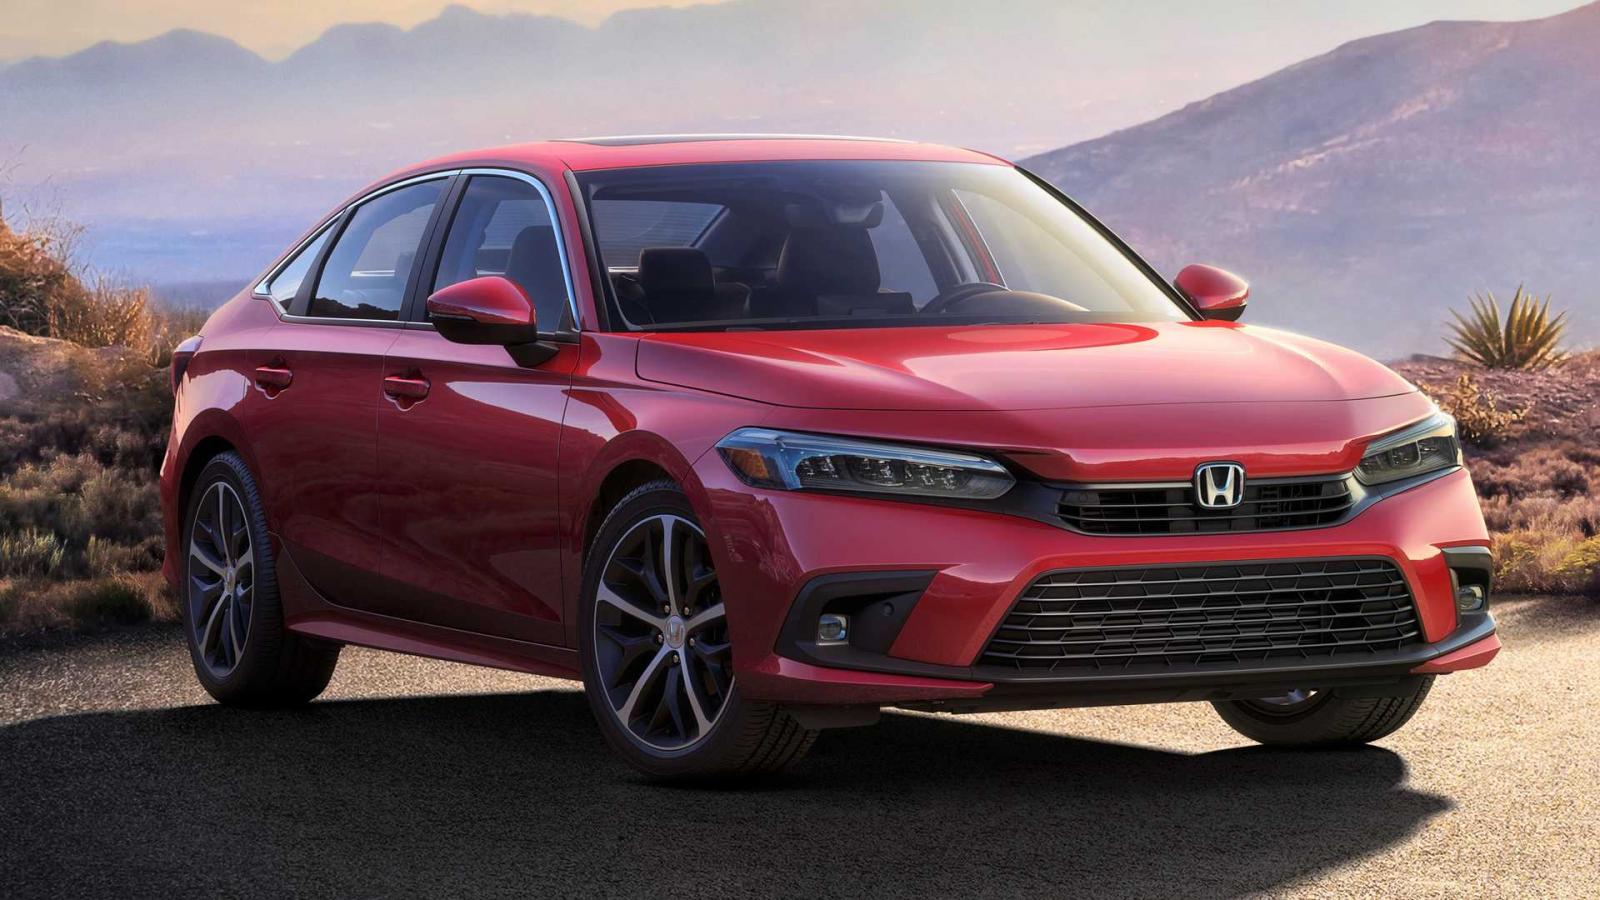 No More Spy Pics; Here's The First Official Image Of 11th-Gen Honda Civic